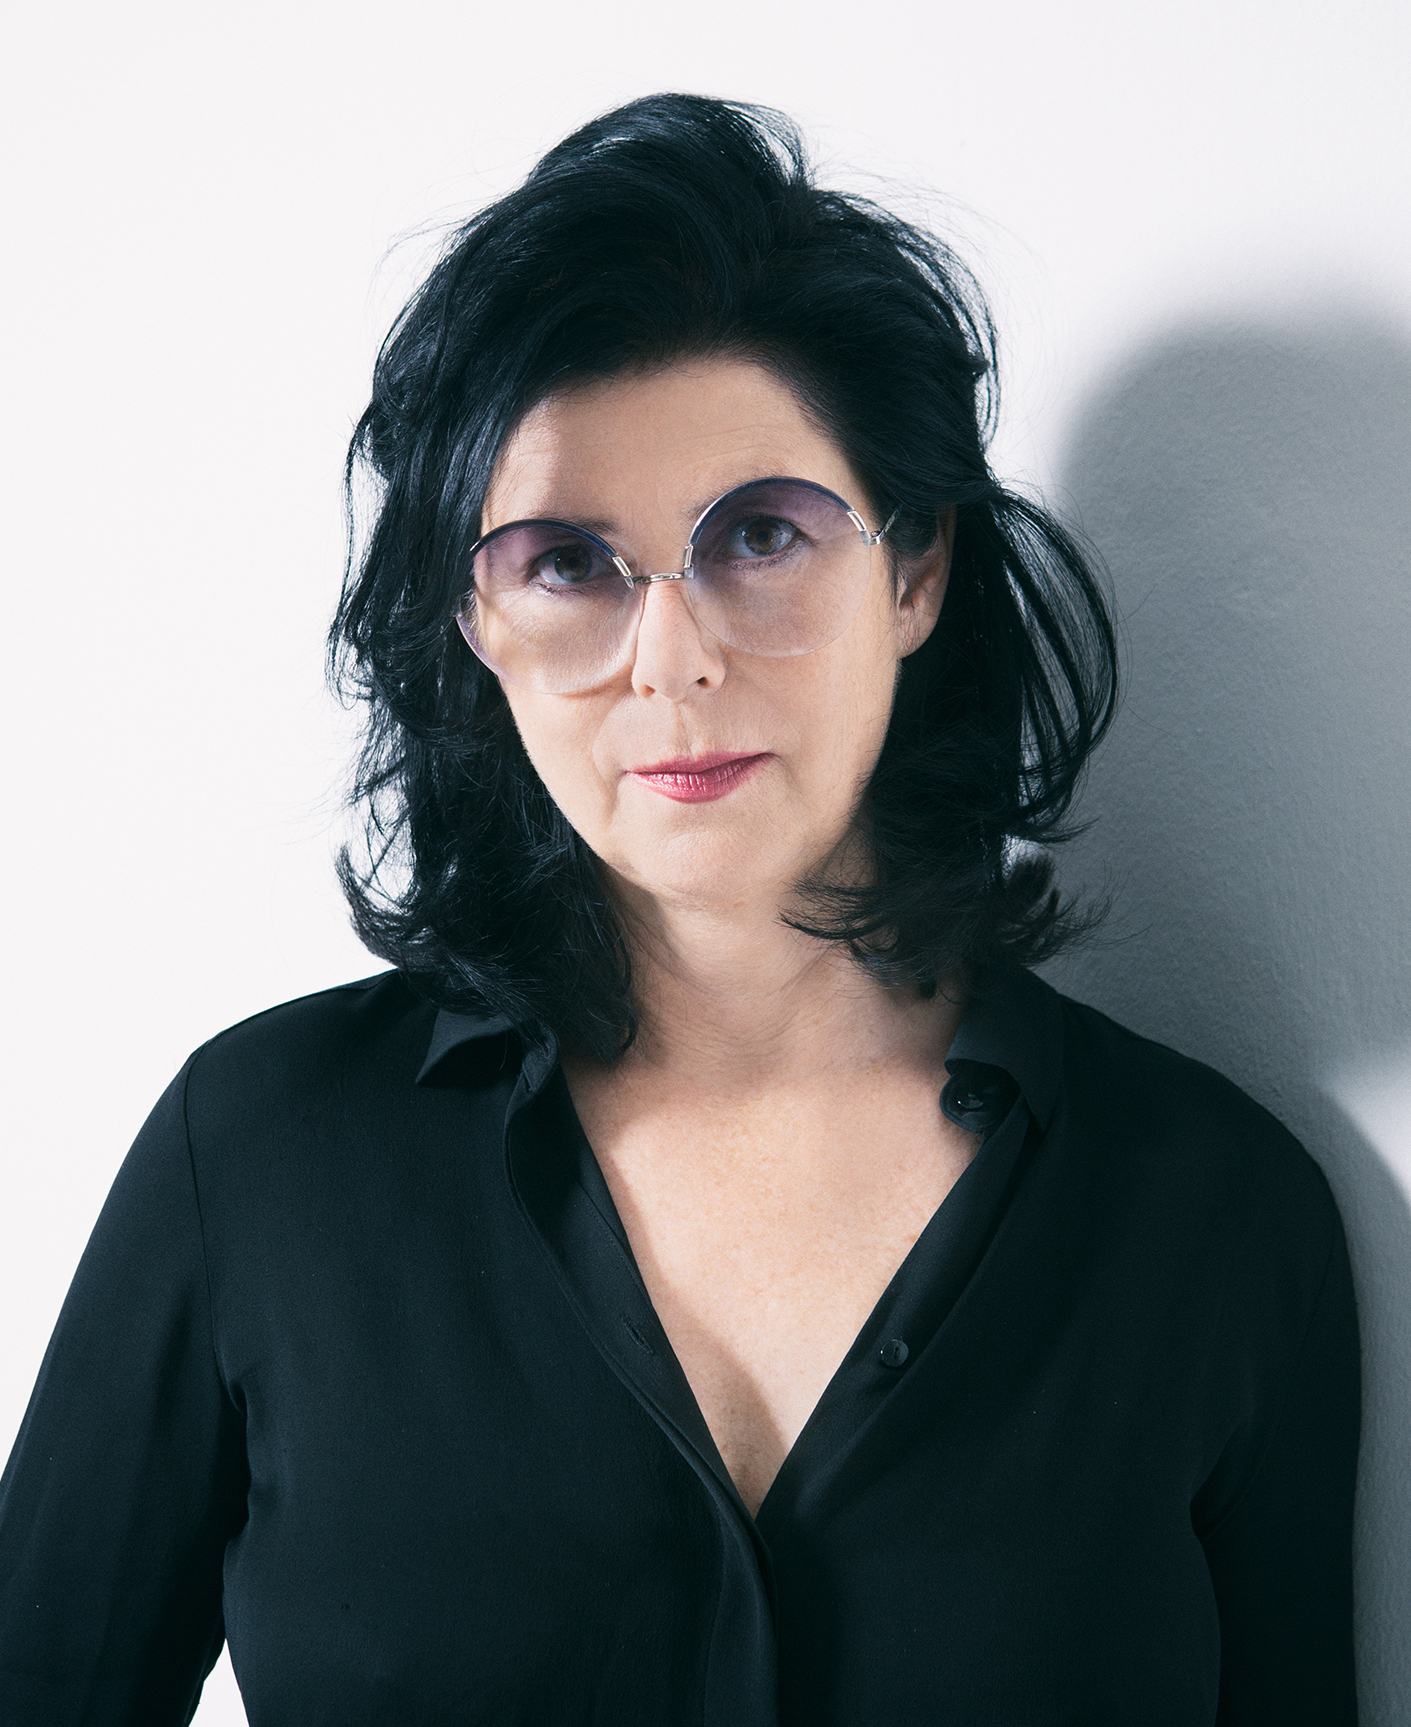 A figure with black hair, purple-tinted glasses, dark lips and a black shirt looks into the camera